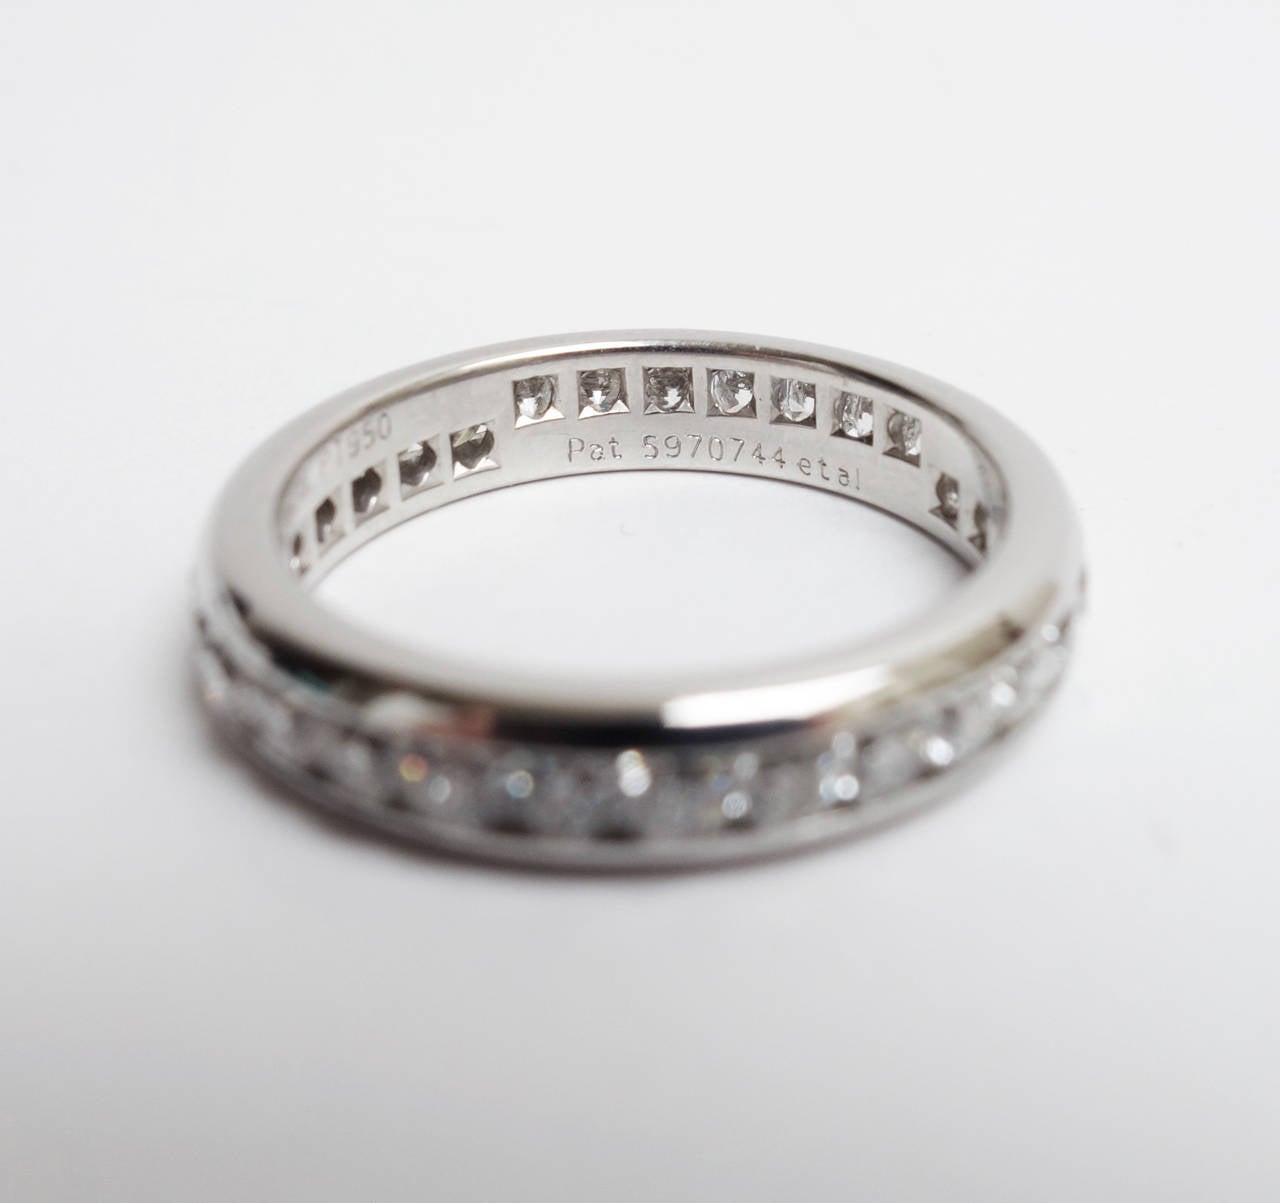 Tiffany&Co. Platinum and Diamond band from the "Lucida" collection. 
Current Retail: $ 9,575.00
Featuring 29 trade marked Lucida cut diamonds, approx. 1.42ct total weight.
Hallmarks: T. & Co., PT950, Lucida, copyright
Weight: